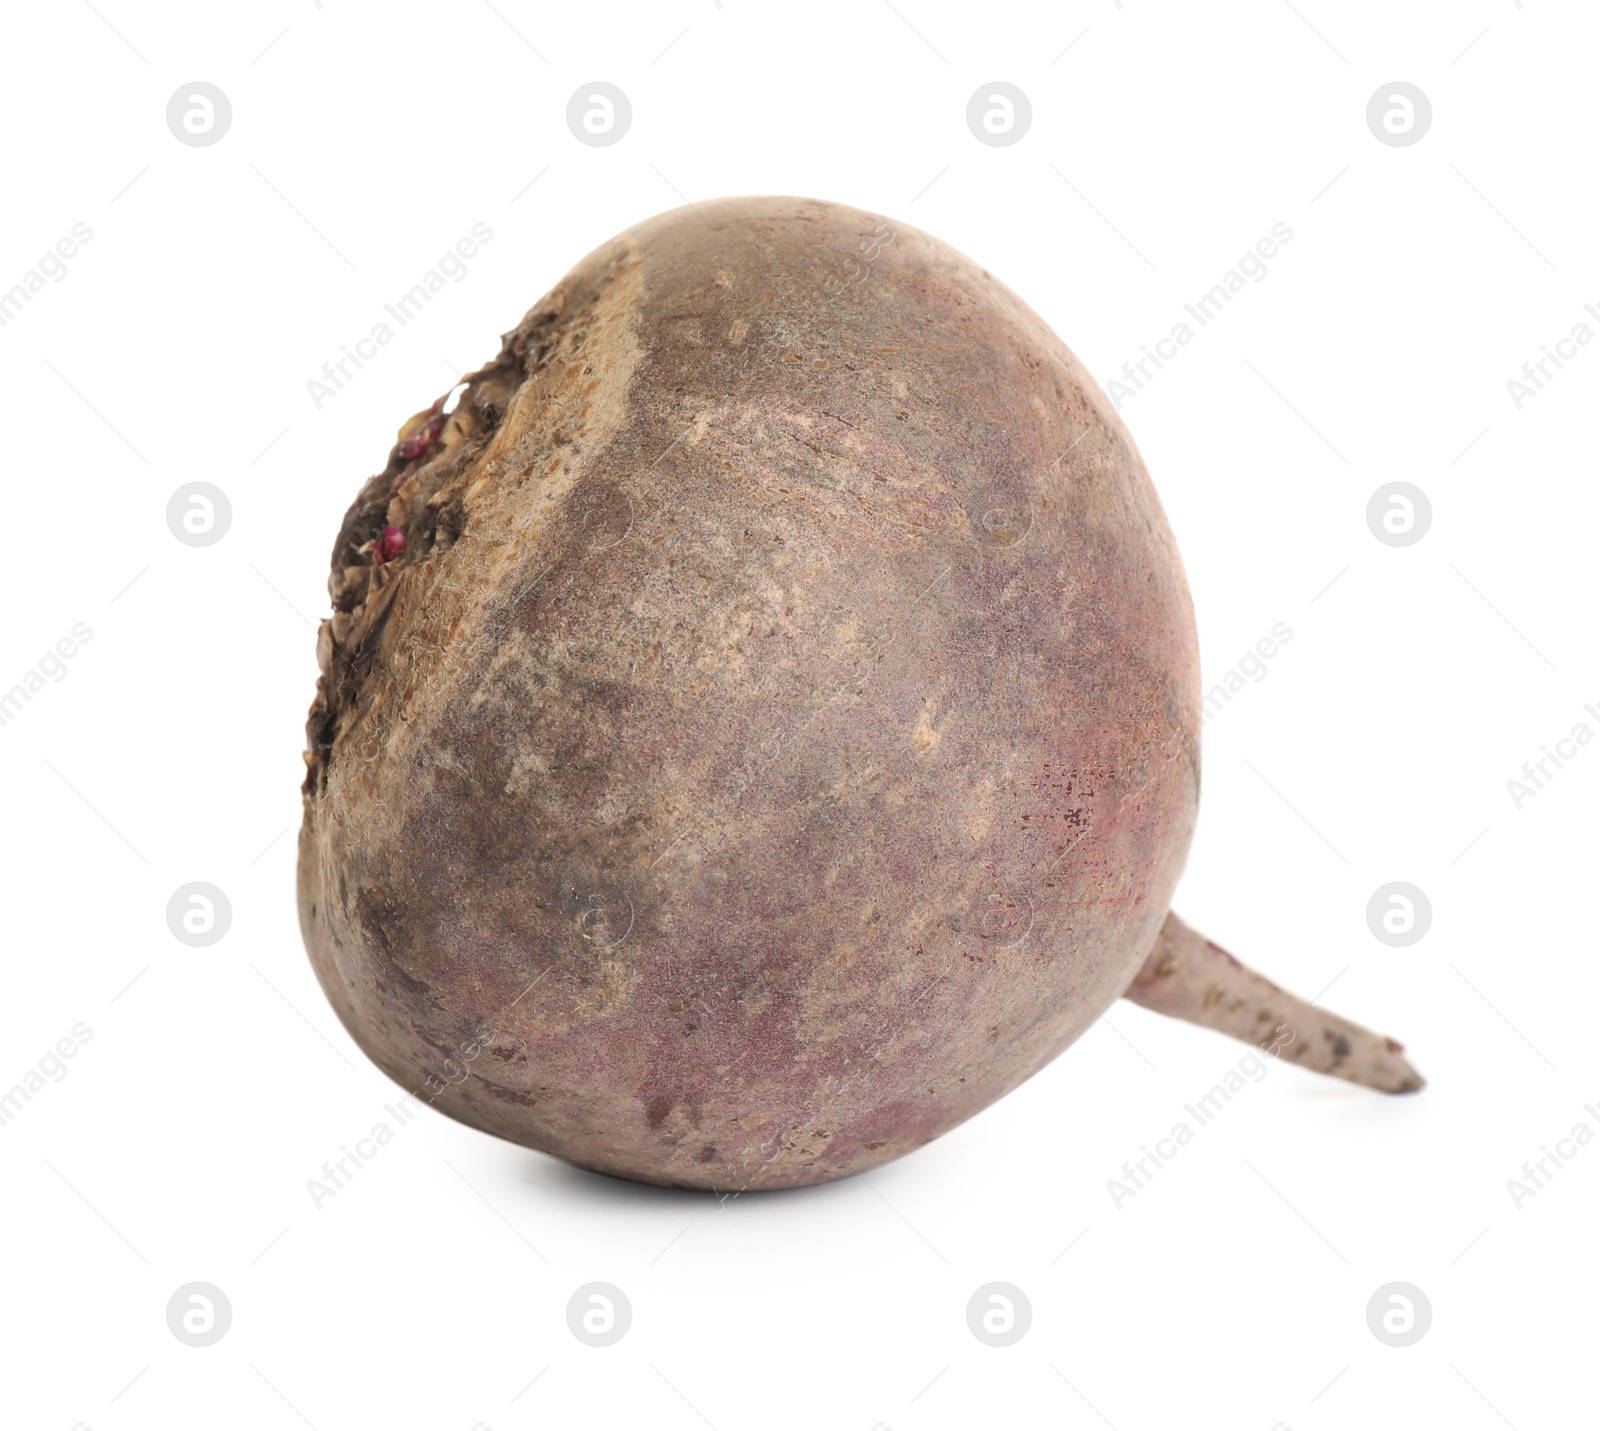 Photo of Whole fresh beet root isolated on white